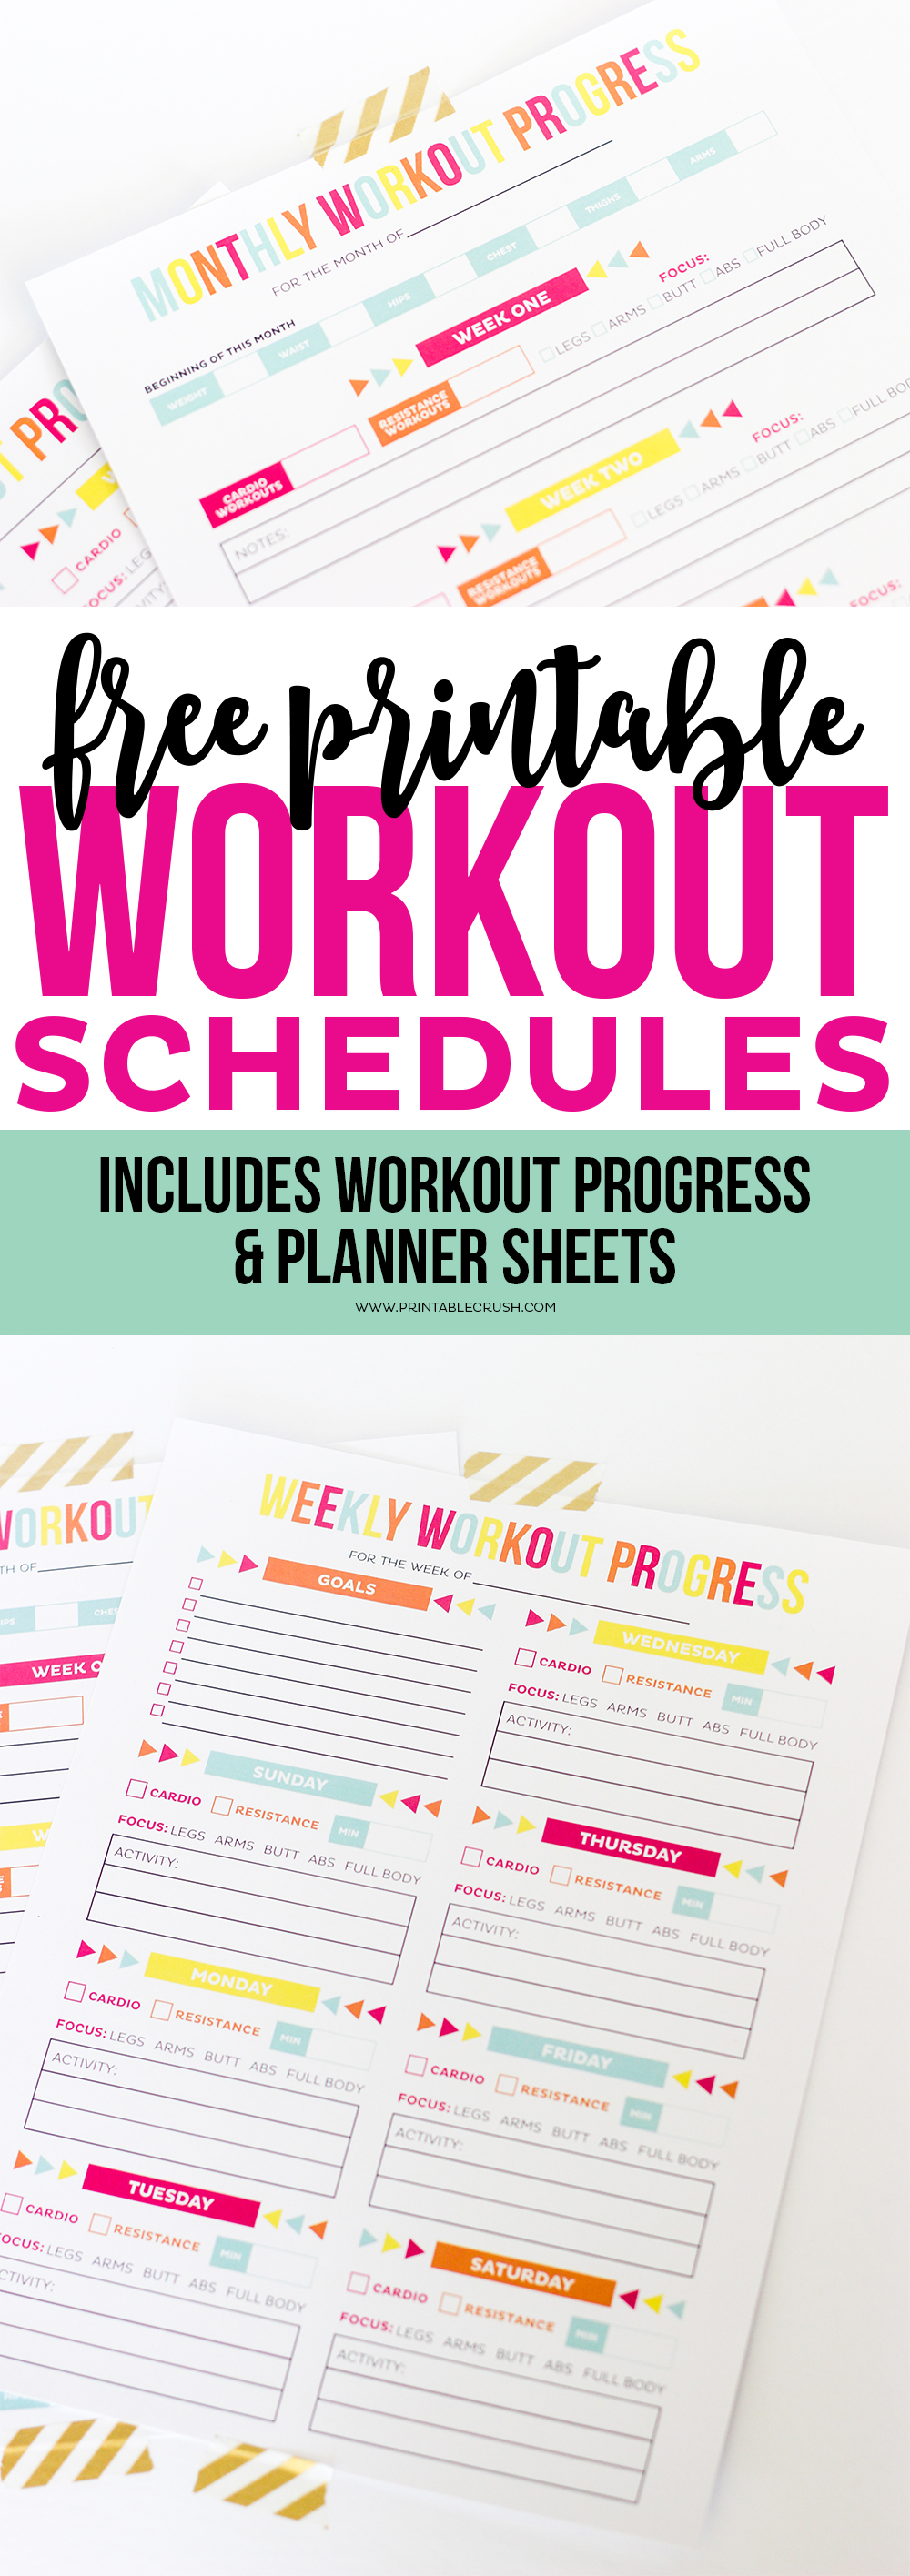 http://printablecrush.com/wp-content/uploads/2016/10/FREE-Printable-Workout-Schedules-1-copy.jpg